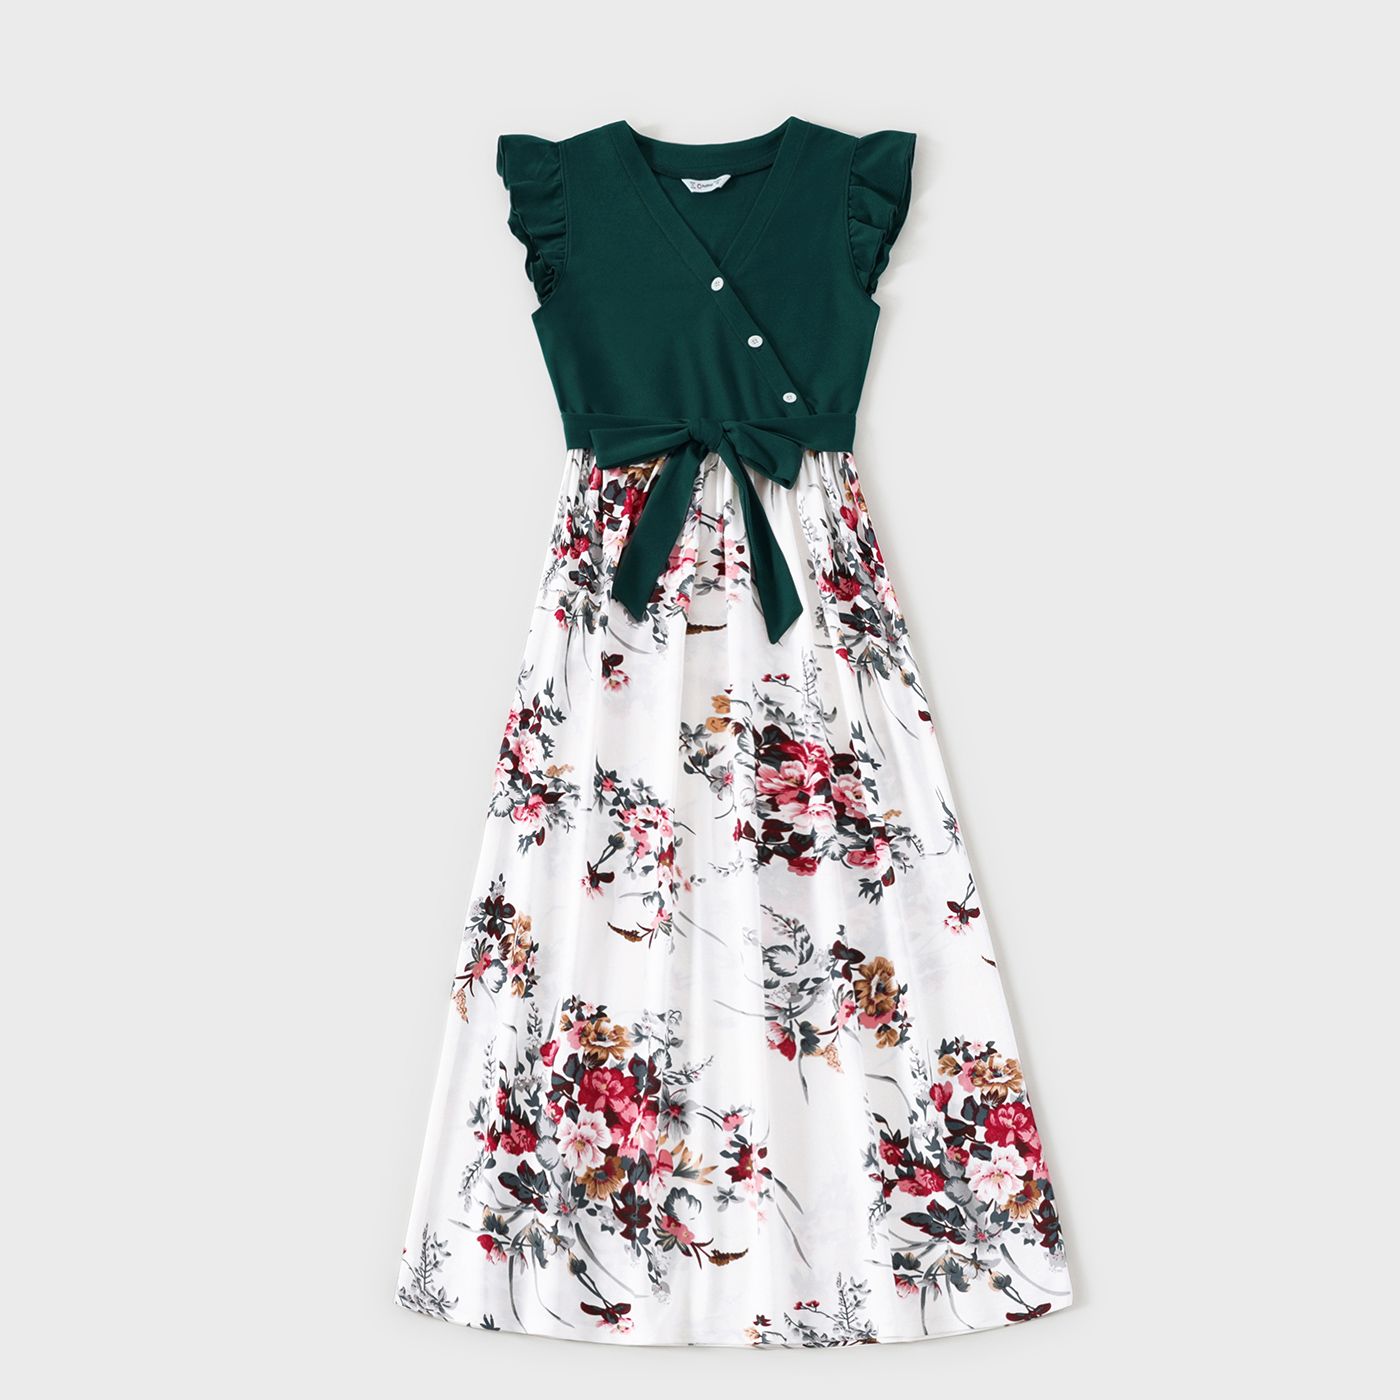 Family Matching Floral Print Splicing Dark Green Flutter-sleeve Dresses and Short-sleeve T-shirts Se